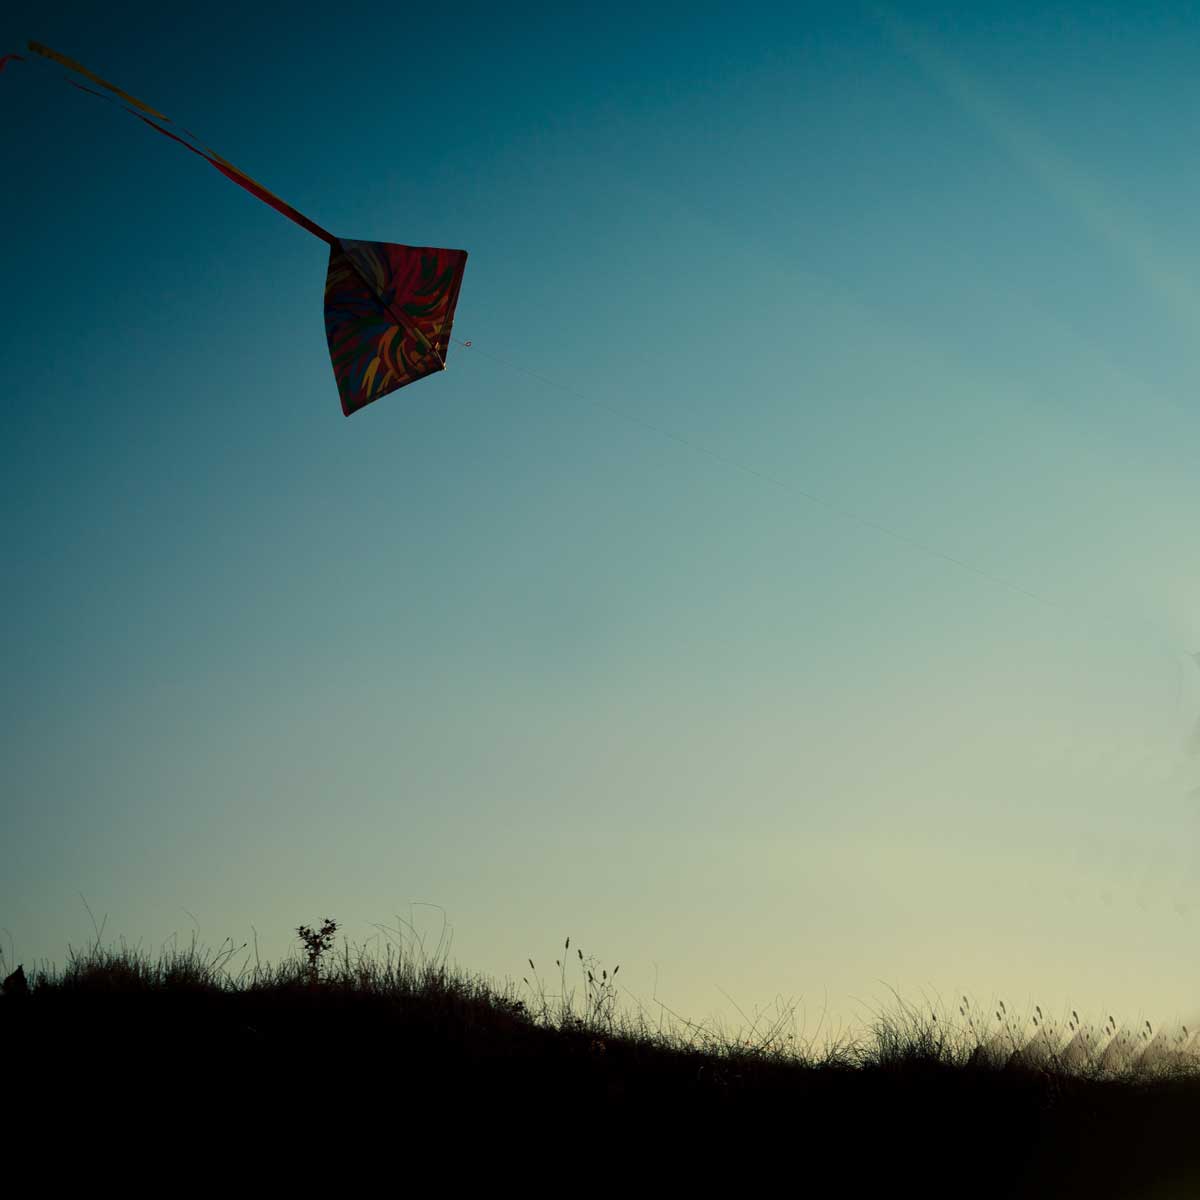 shadow image of a kite flying in the sky at sunset over a field of grass